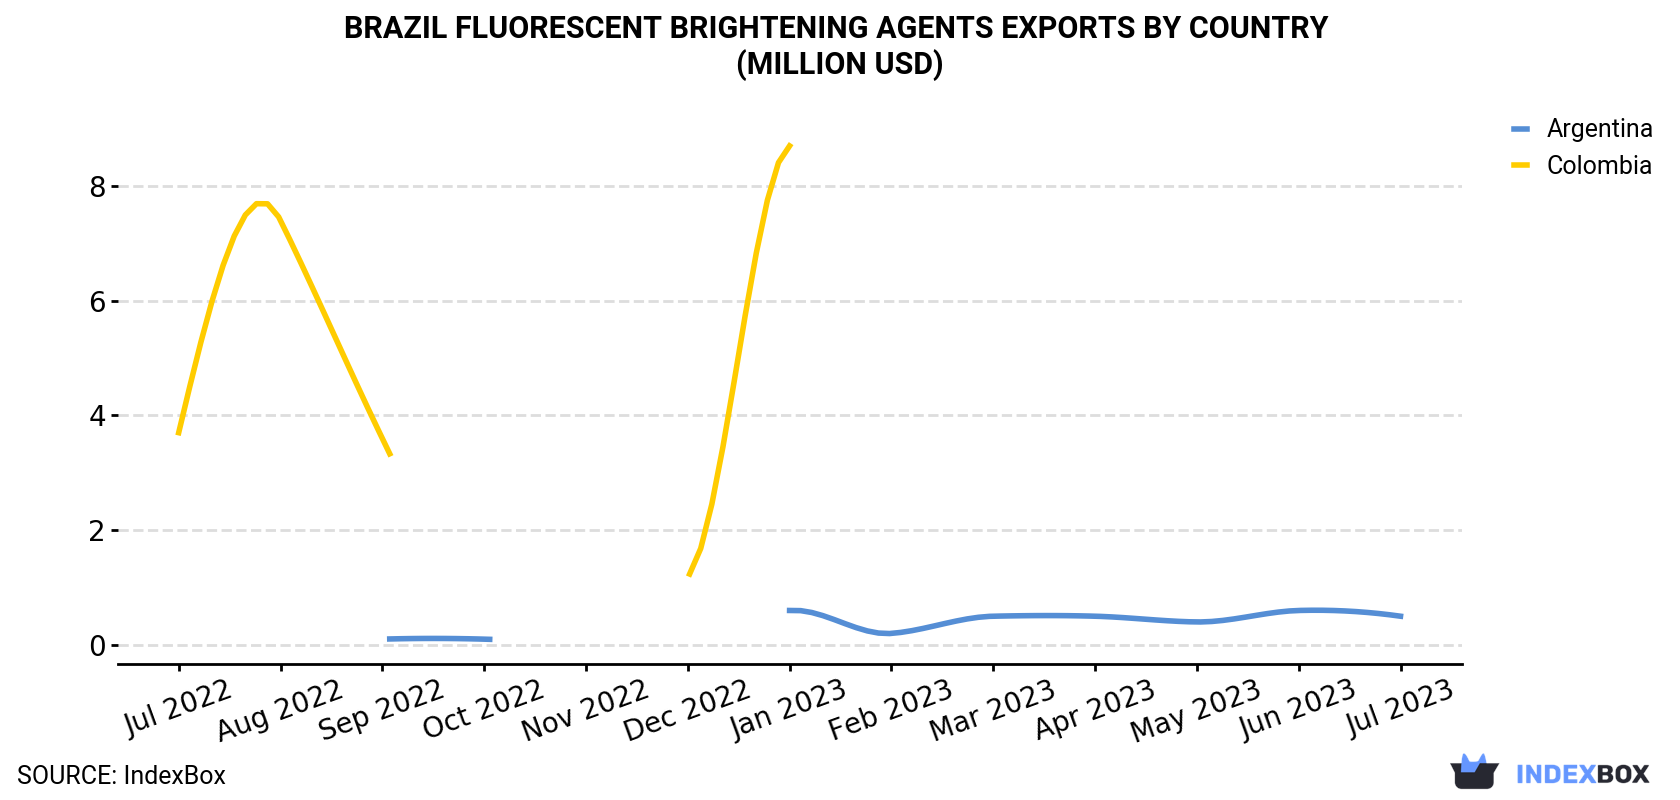 Brazil Fluorescent Brightening Agents Exports By Country (Million USD)